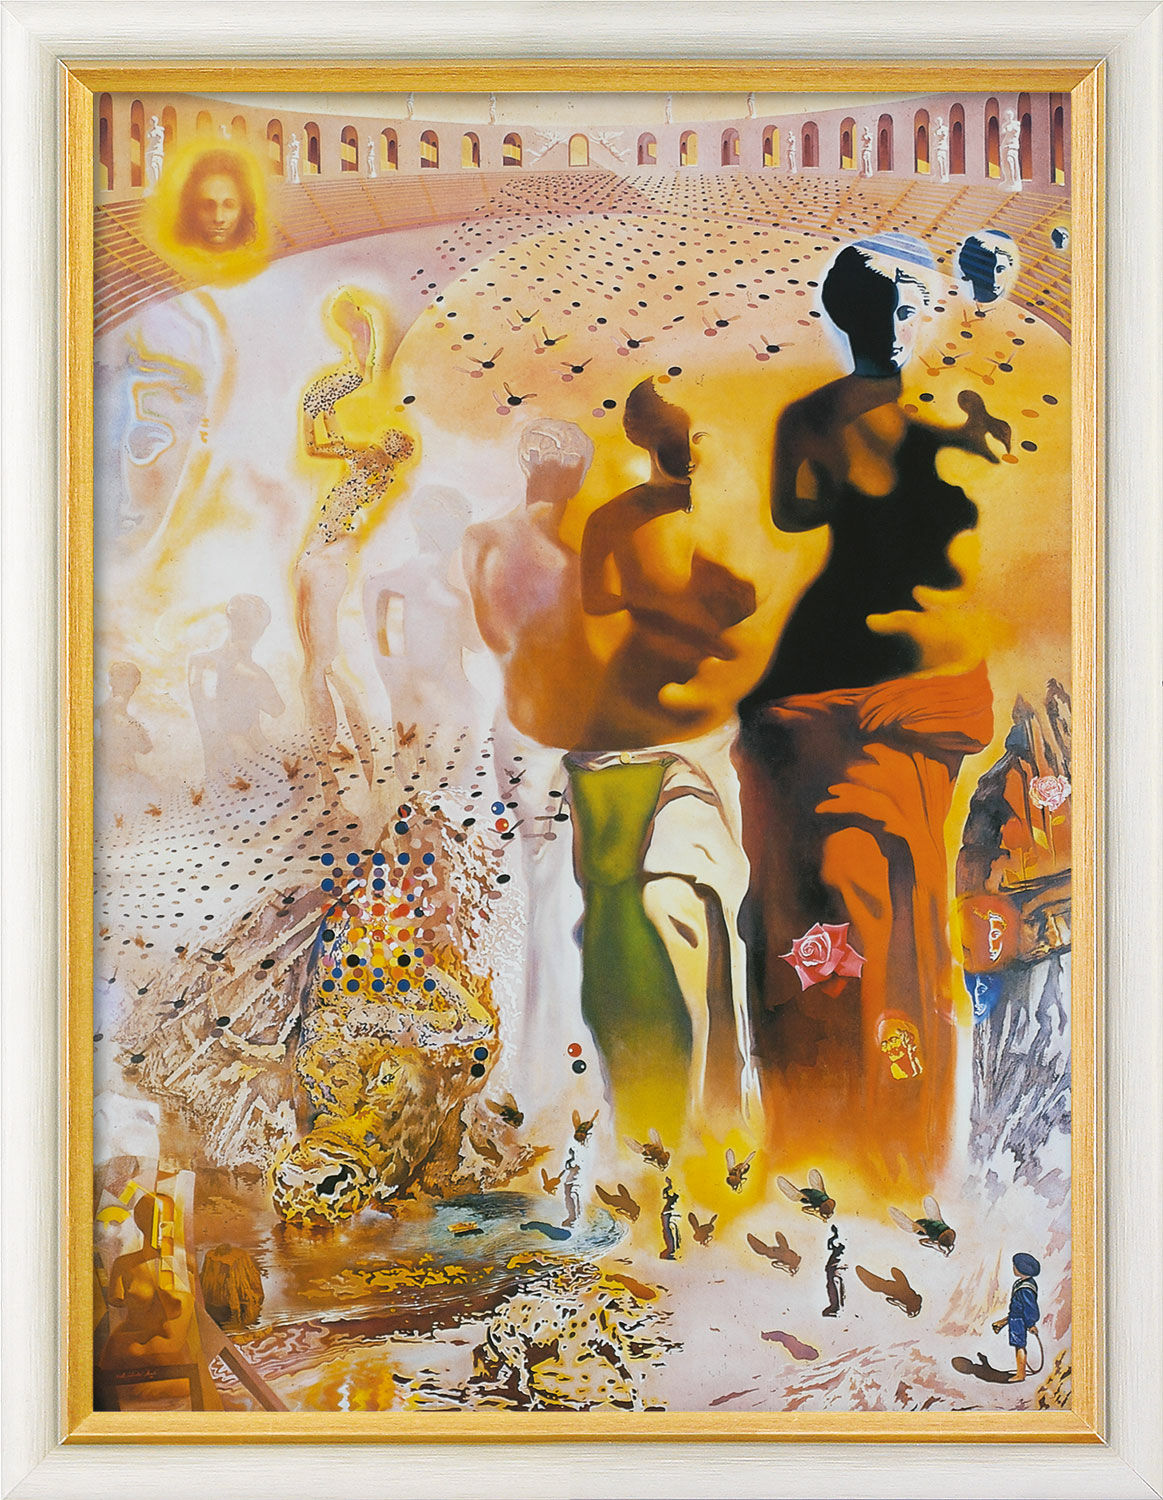 Picture "The Hallucinogenic Torero" (1968-70), framed by Salvador Dalí